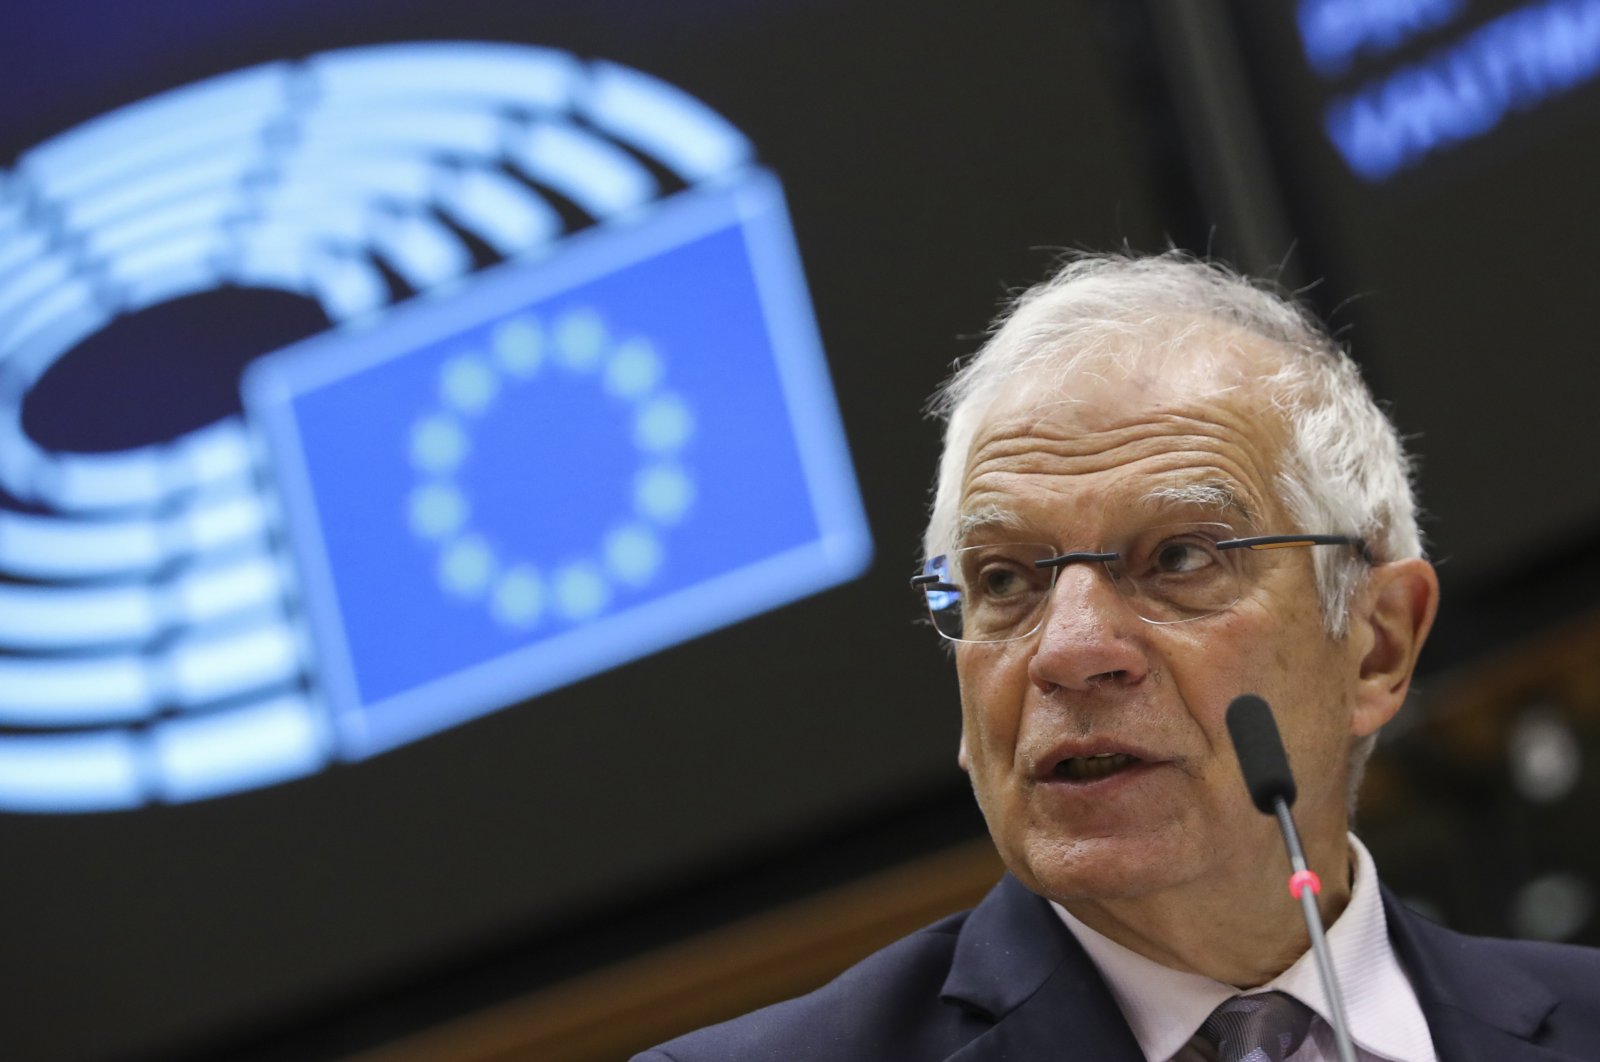 European Union foreign policy chief Josep Borrell addresses the European Parliament on relations with the U.S. during a plenary session, in Brussels, Nov. 11, 2020. (AP)